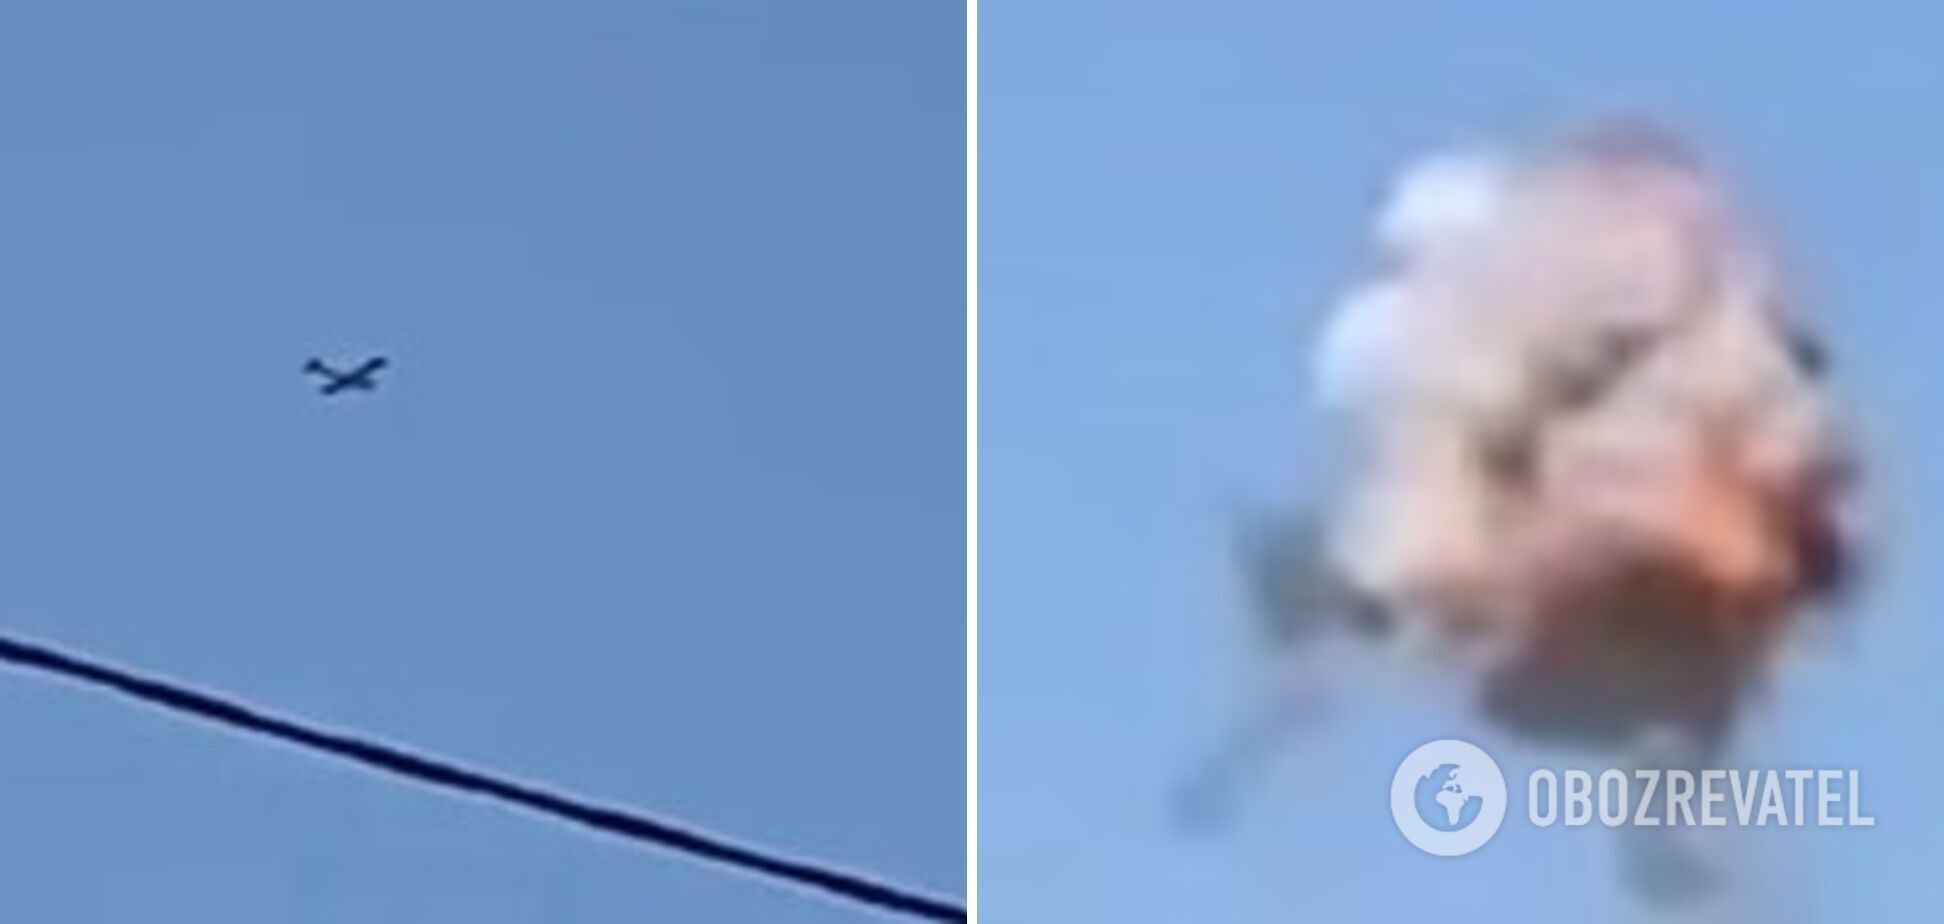 ''Very noisy'': Bryansk residents complained about a new drone attack, there were explosions. Video